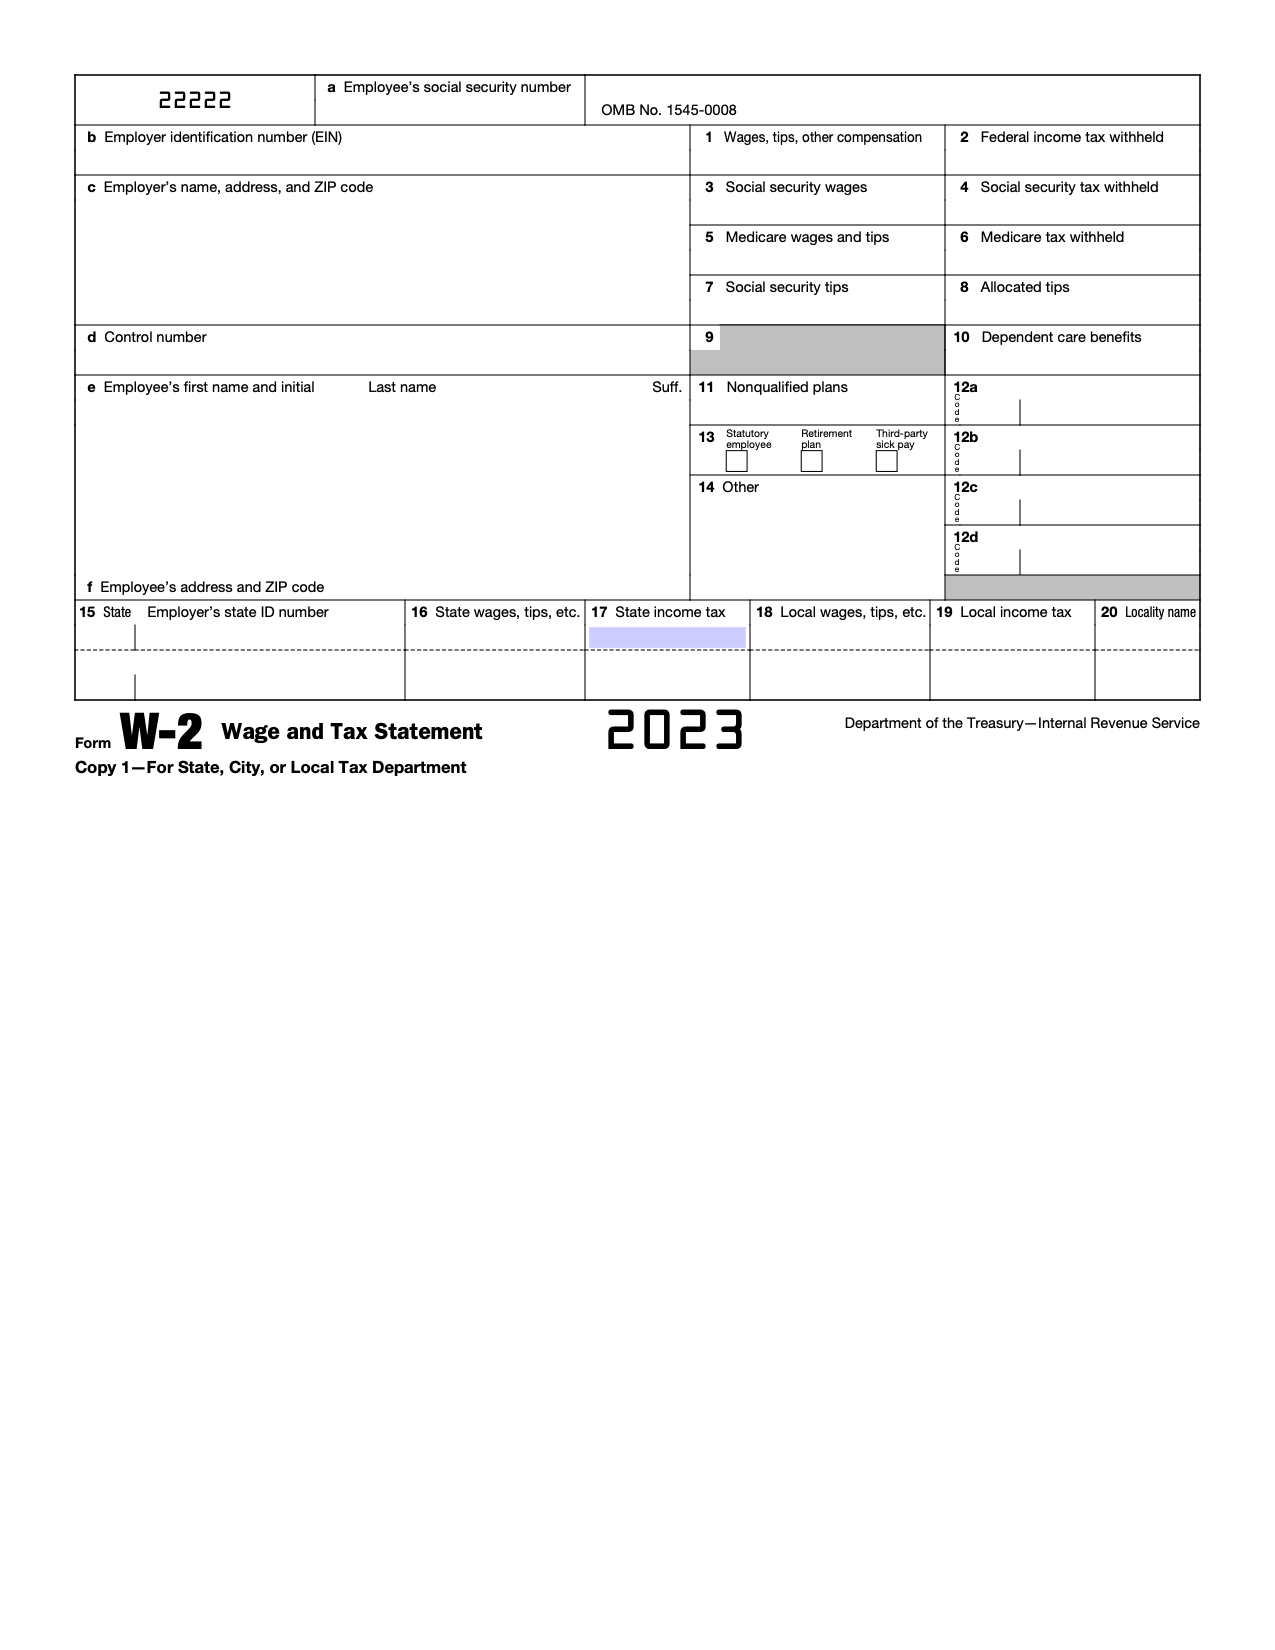 Free Irs Form W-2 | Wage And Tax Statement - Pdf – Eforms pertaining to Blank W2 Forms